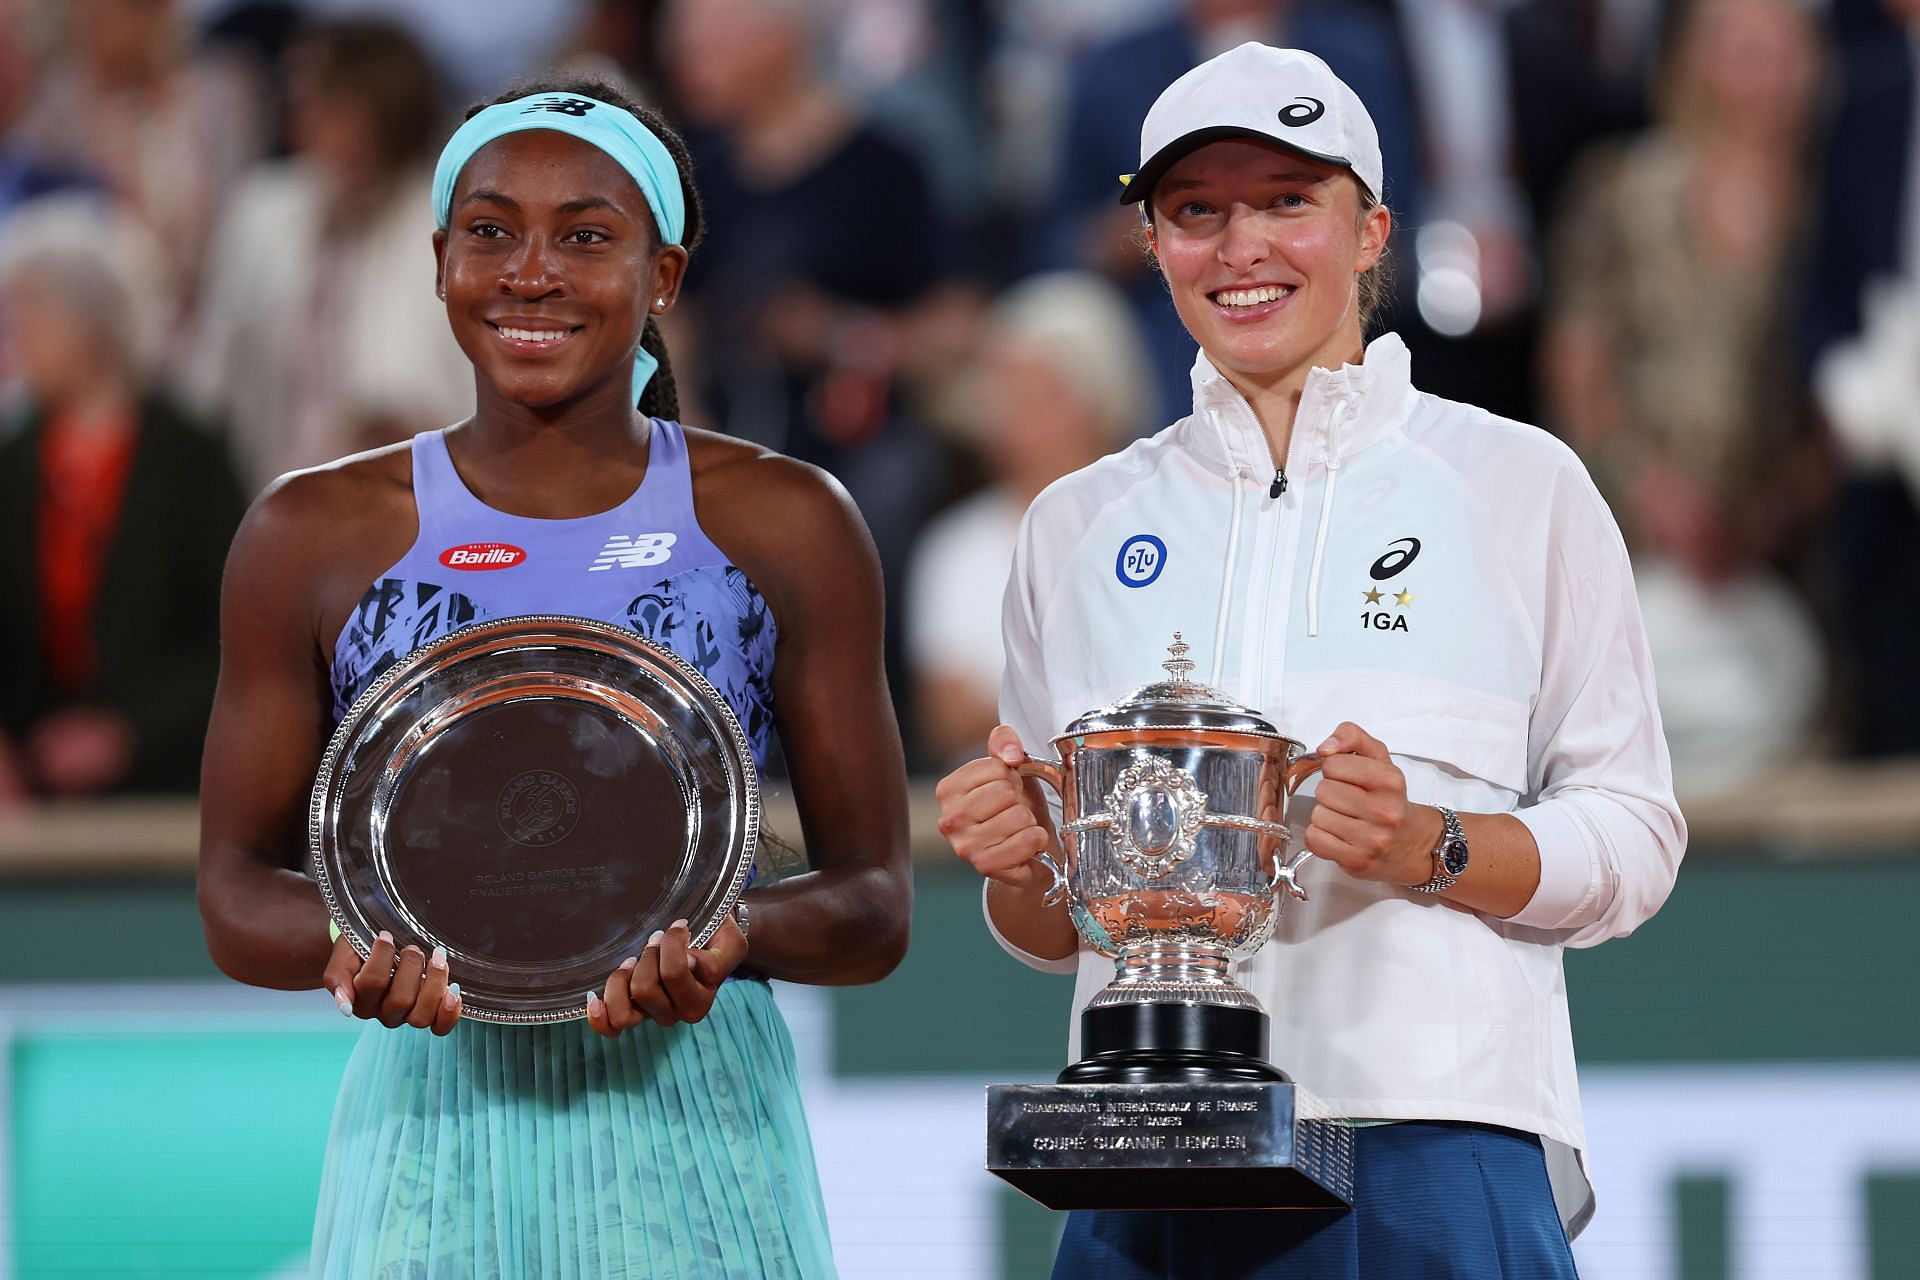 Coco Gauff vs Iga Swiatek Where to watch, TV schedule, live streaming details and more San Diego Open 2022